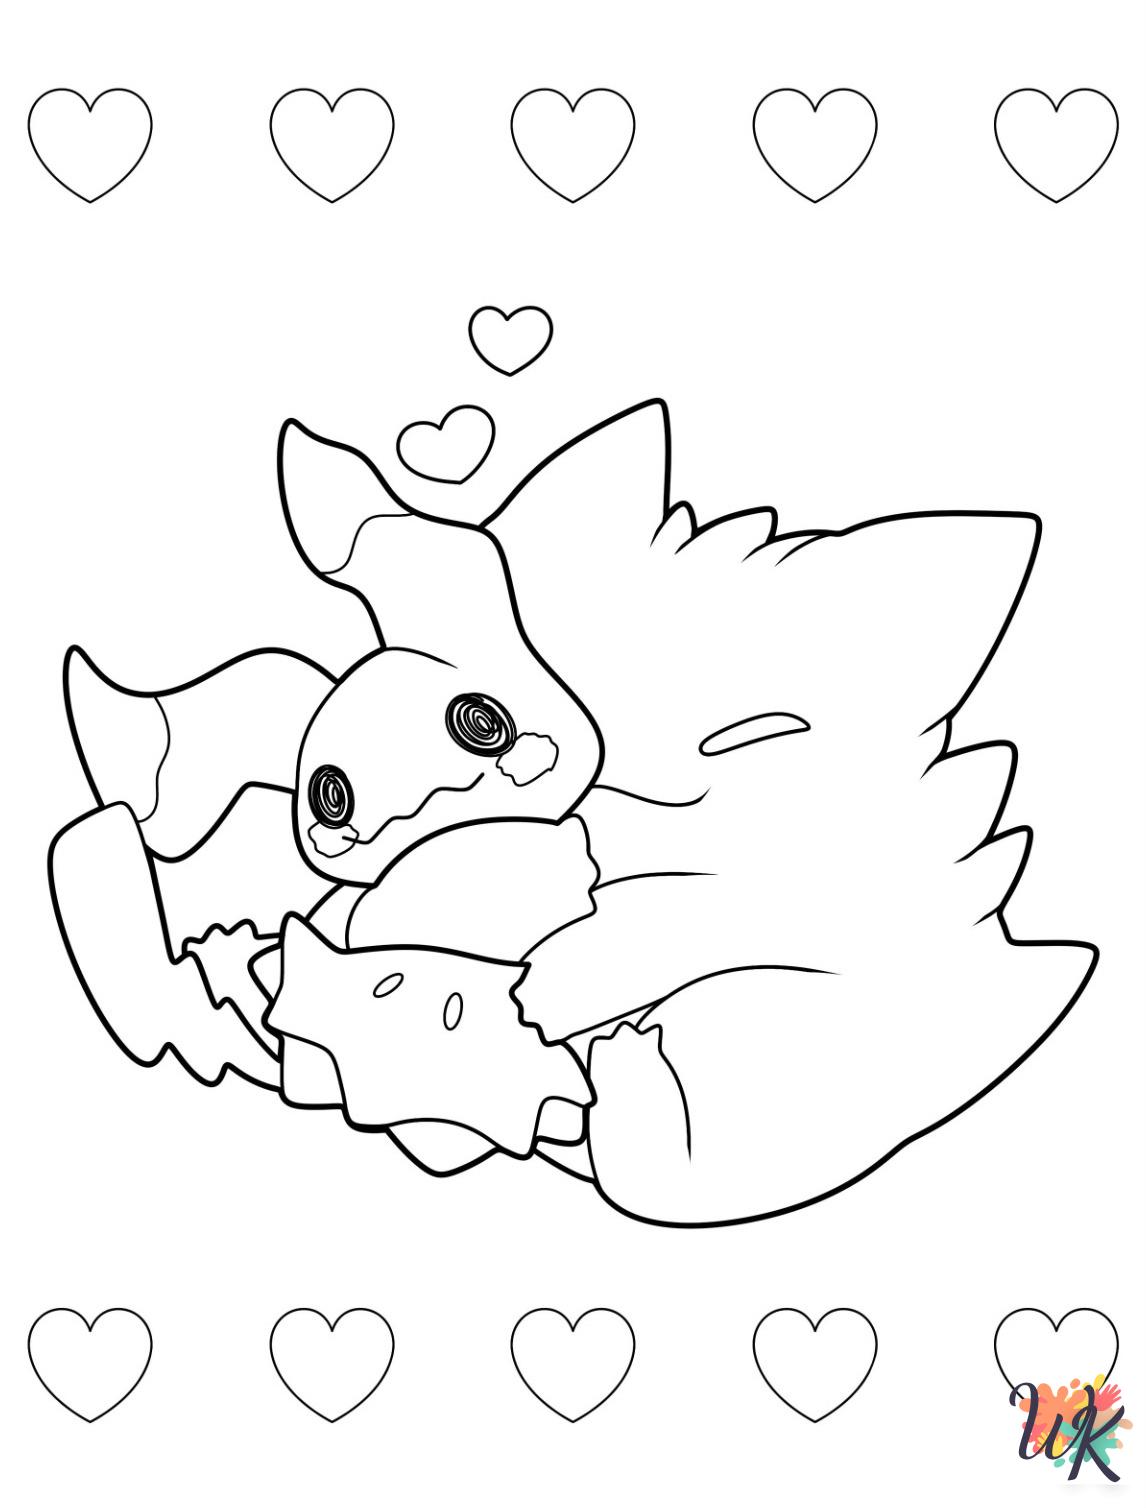 Gengar coloring pages easy